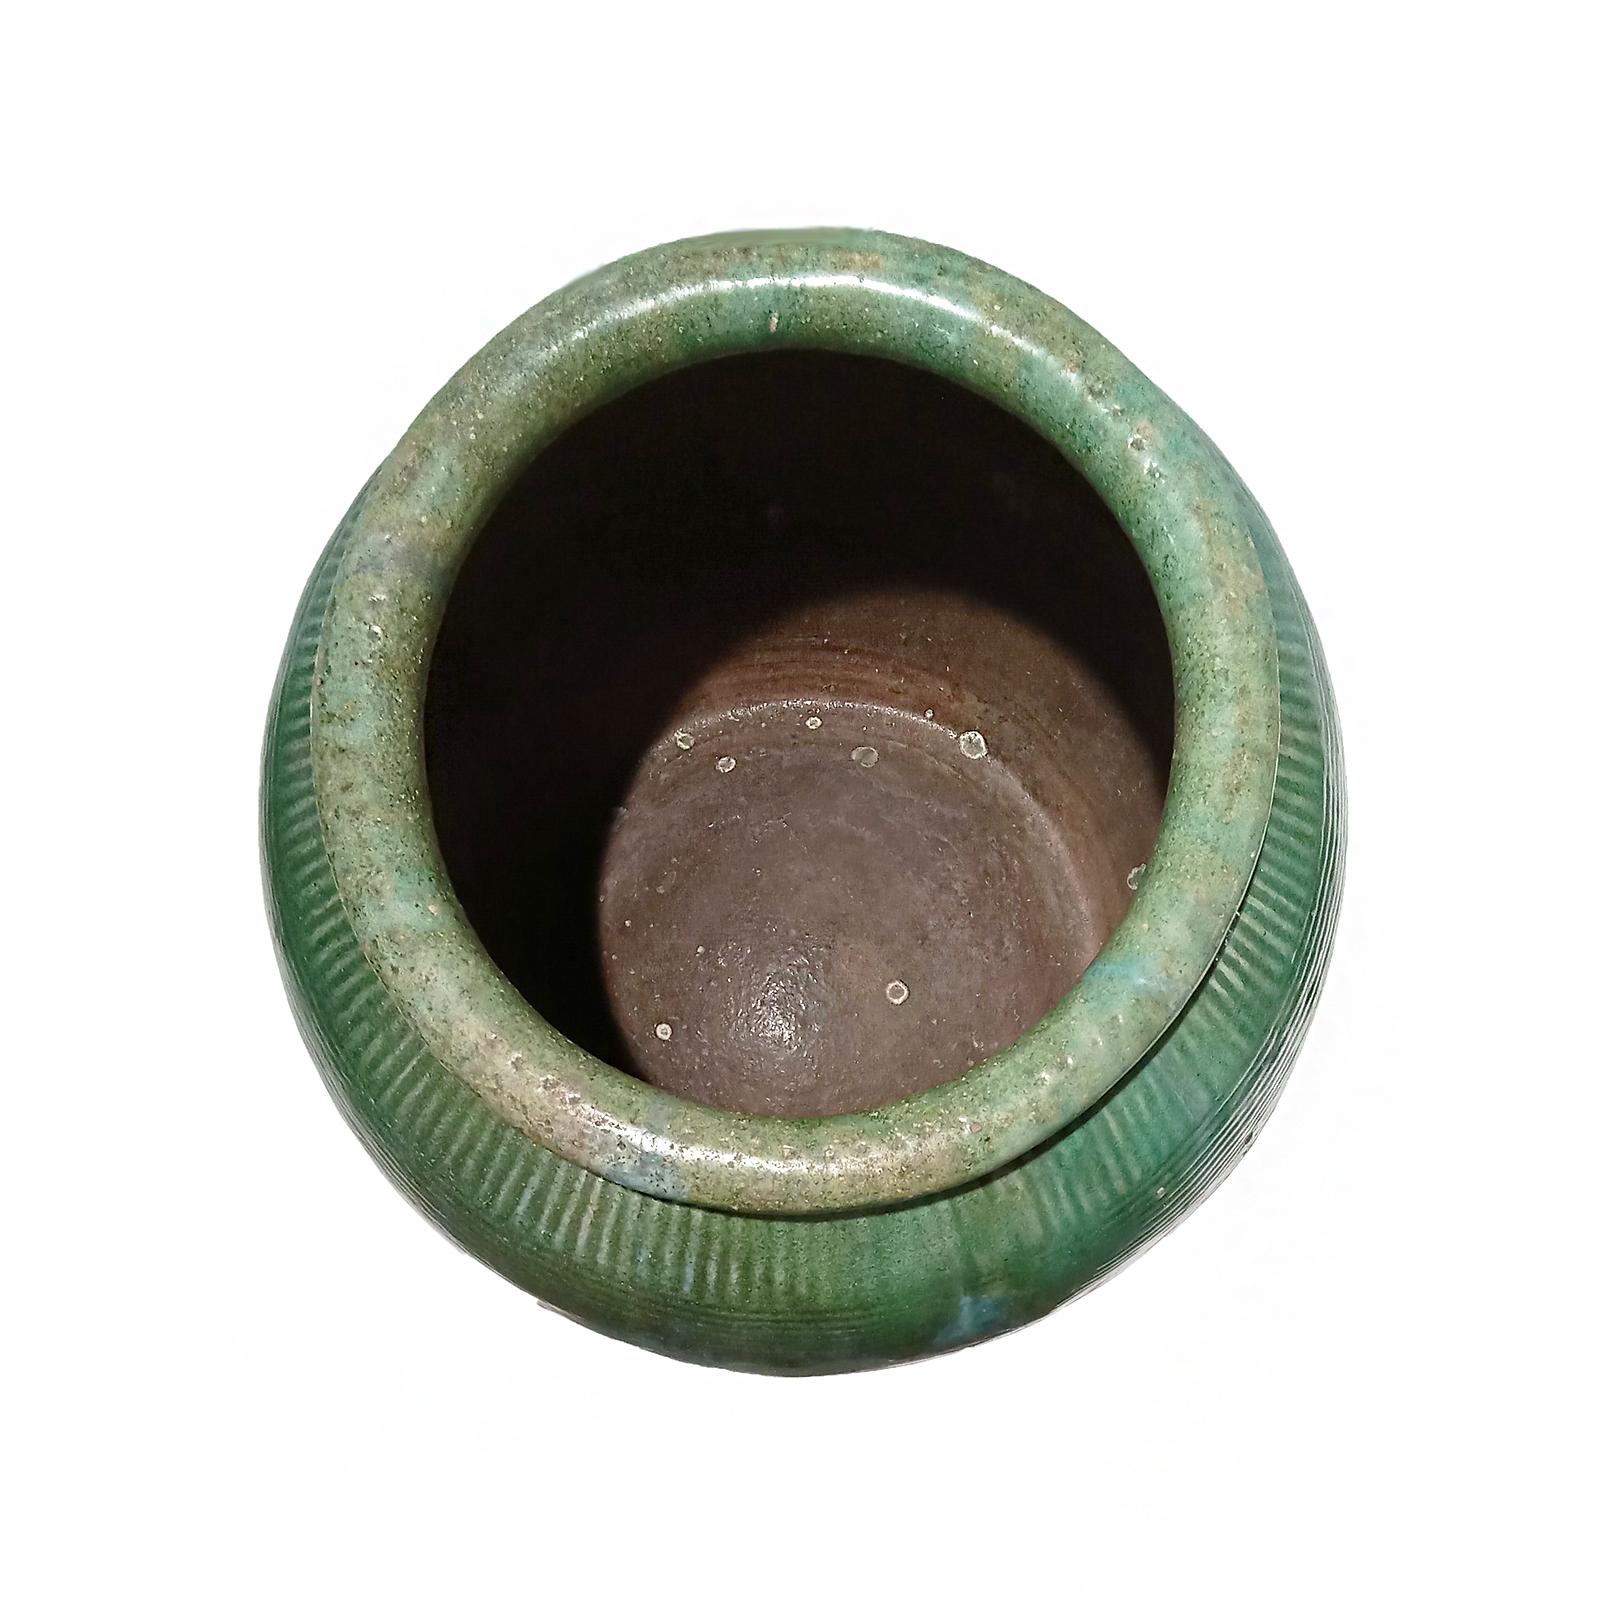 Balinese Terracotta Vase / Jar / Urn with Green Glaze, Contemporary For Sale 4